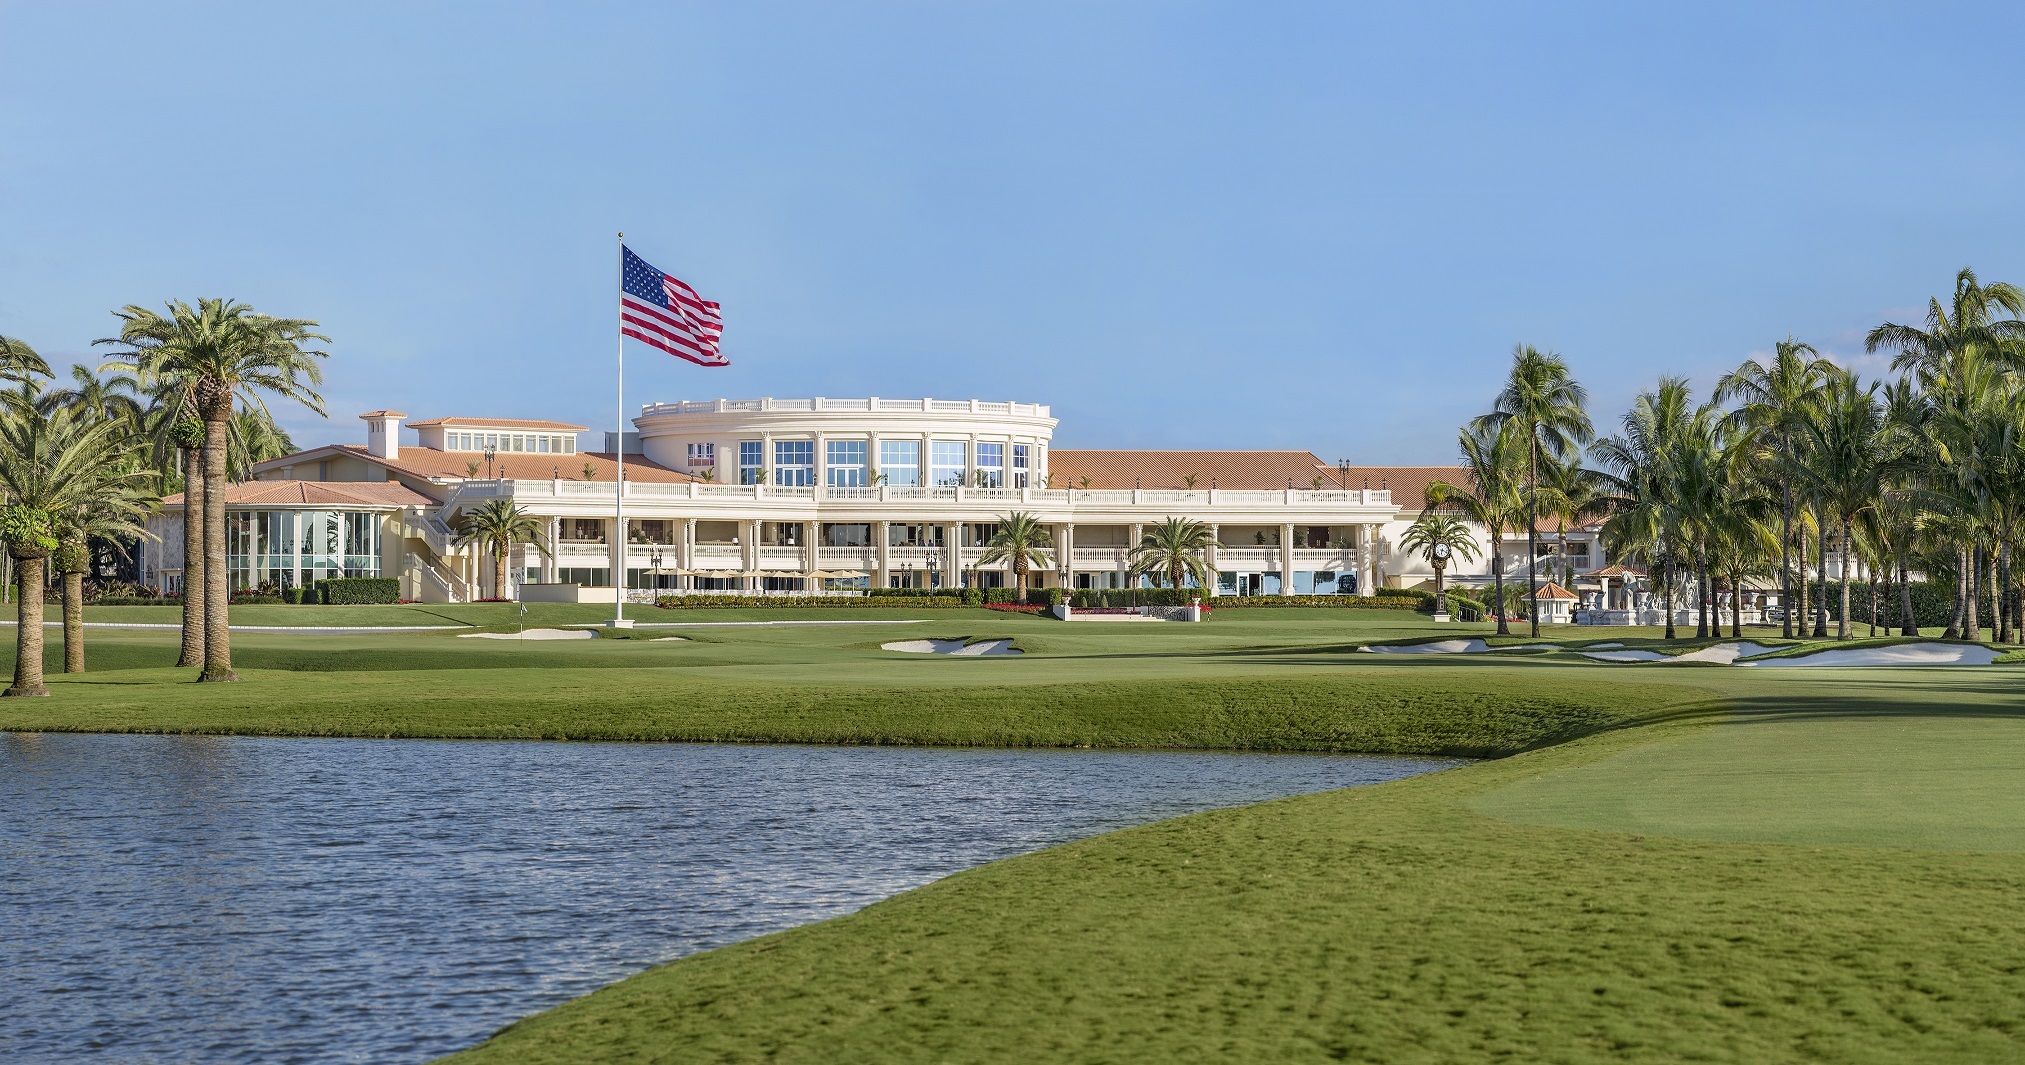 Golf Vacation Package - Great Deal at Doral: Blue Monster Stay & Play + FREE REPLAYS from $413 per day!